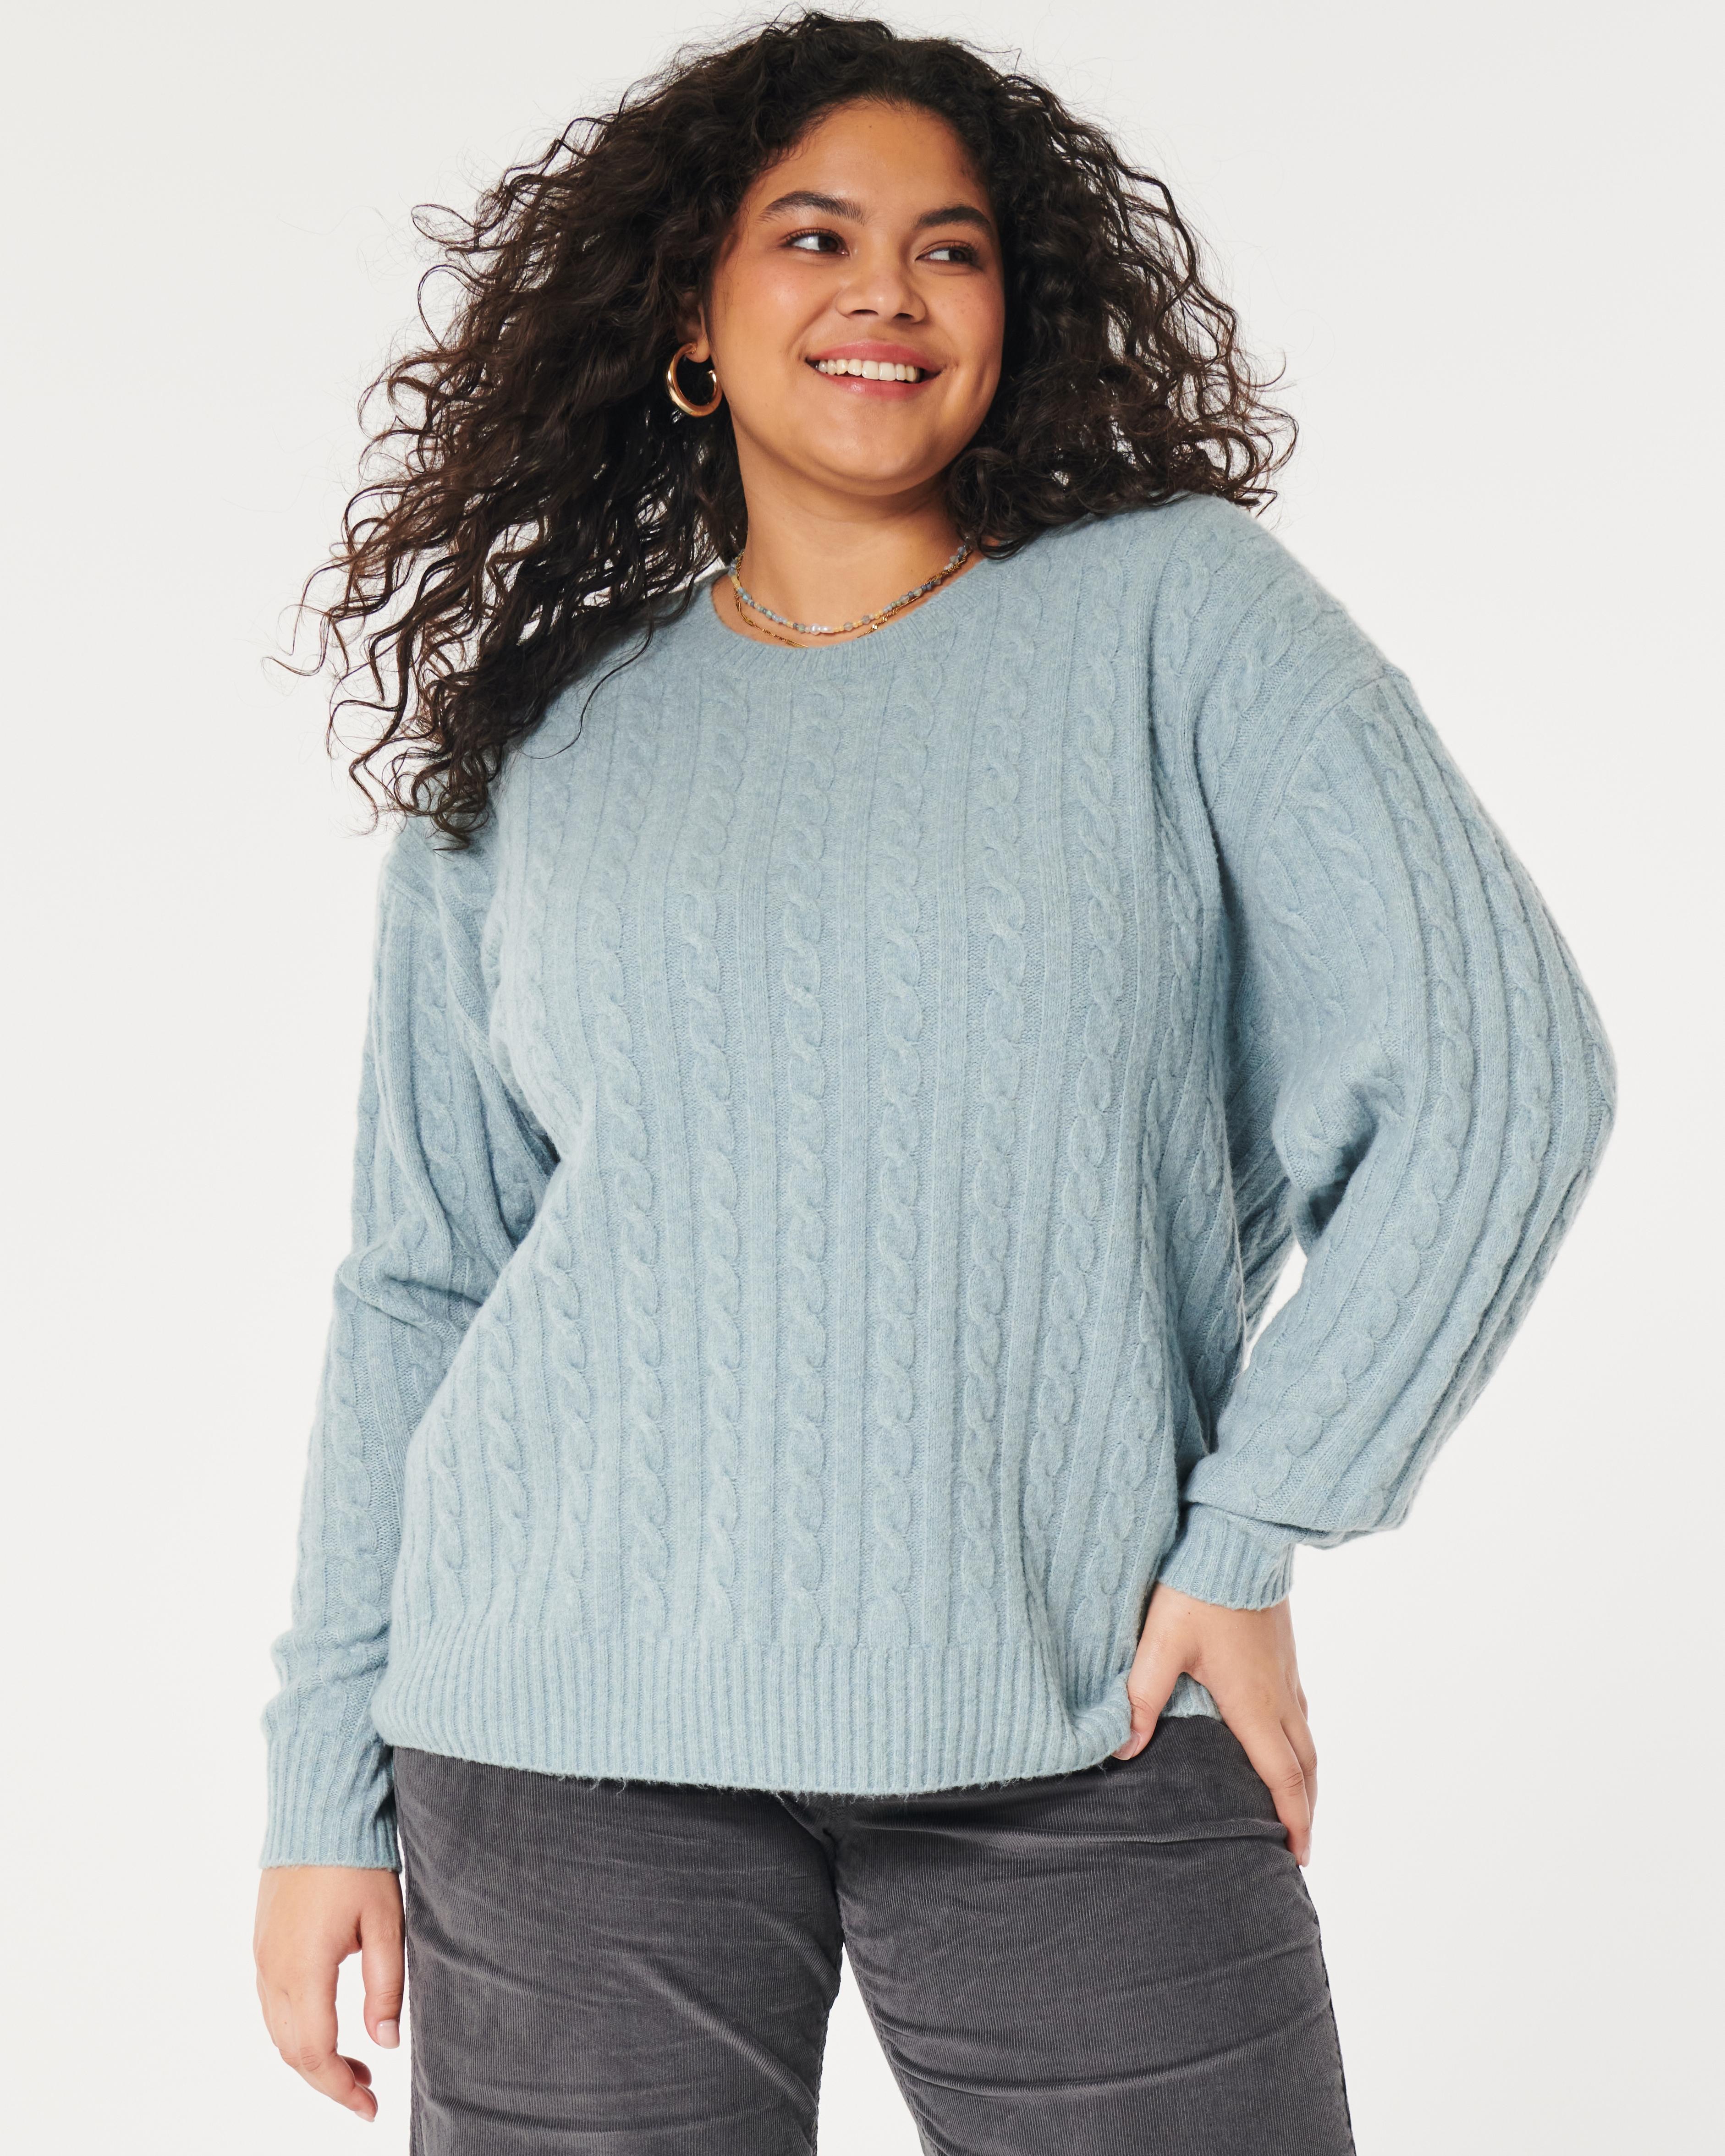 Hollister Big Comfy Sweater in Blue